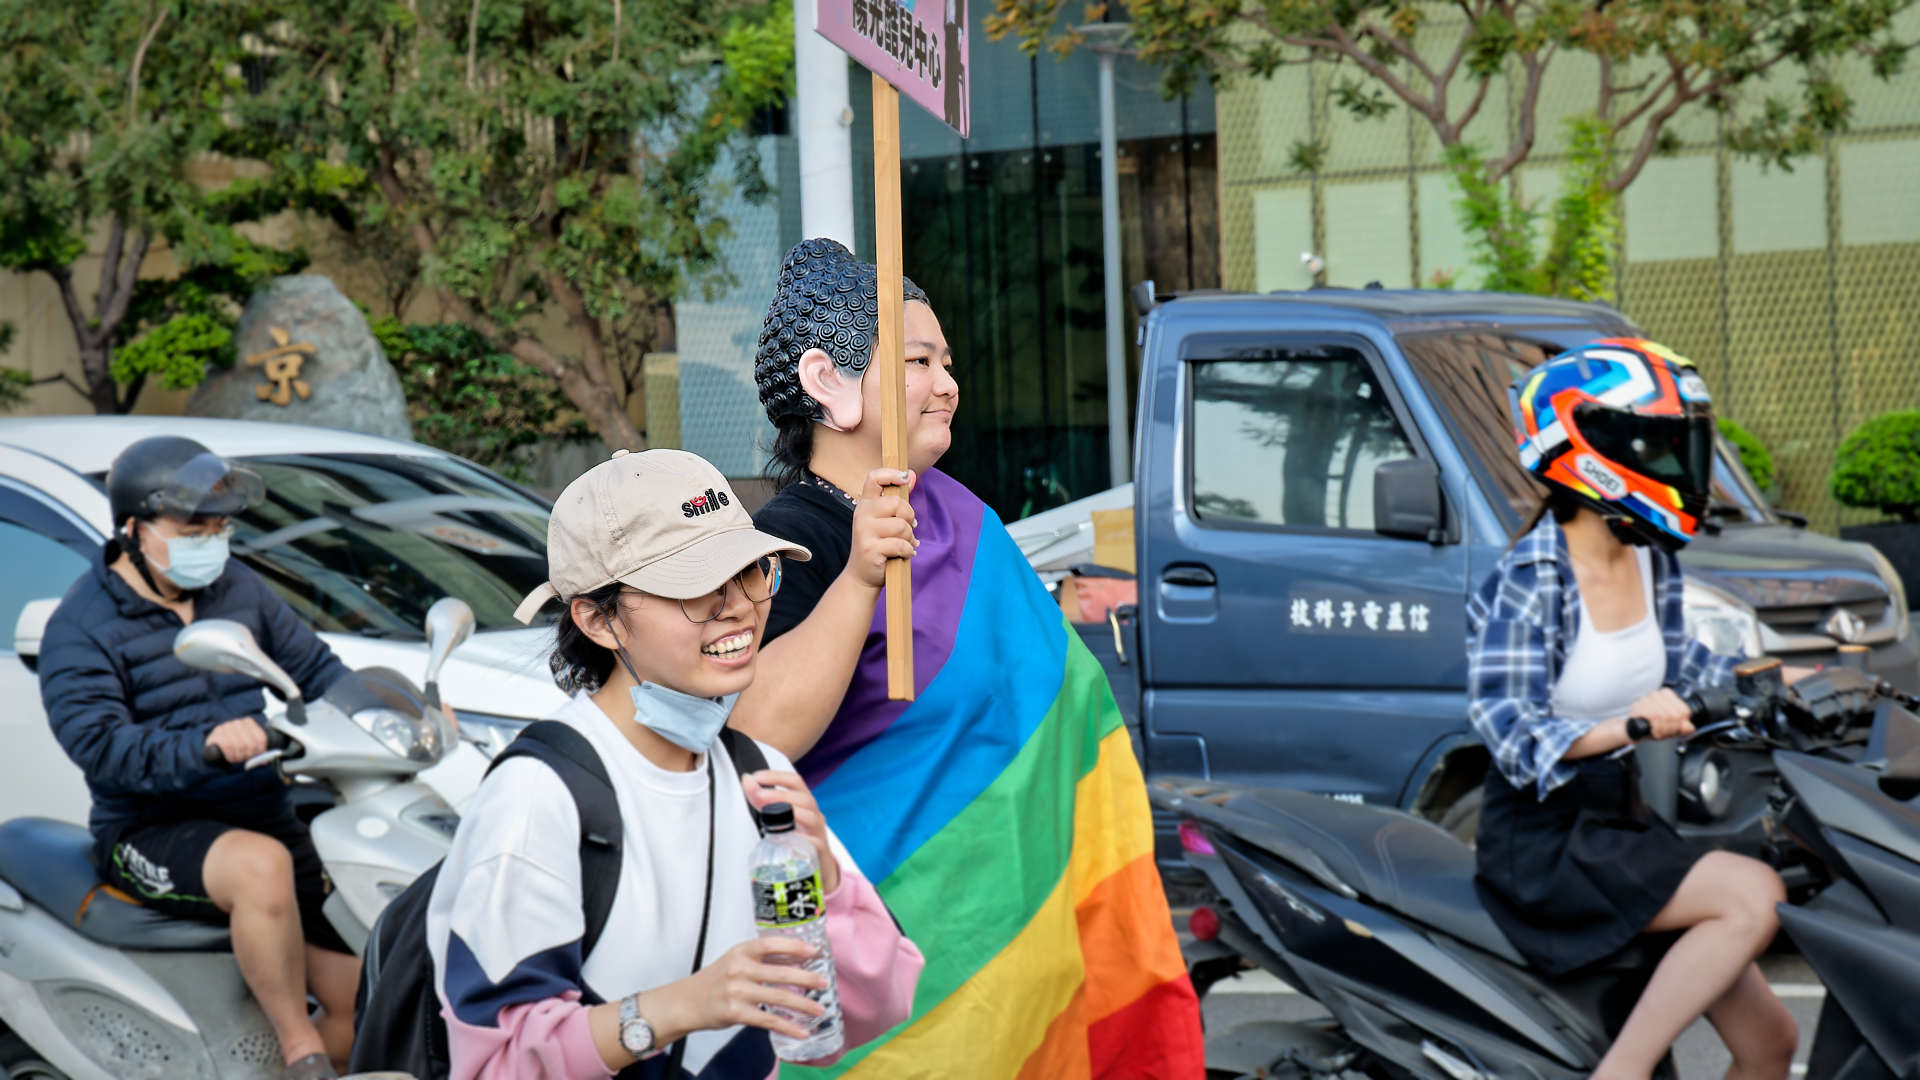 Person in costume and wrapped in a rainbow flag.